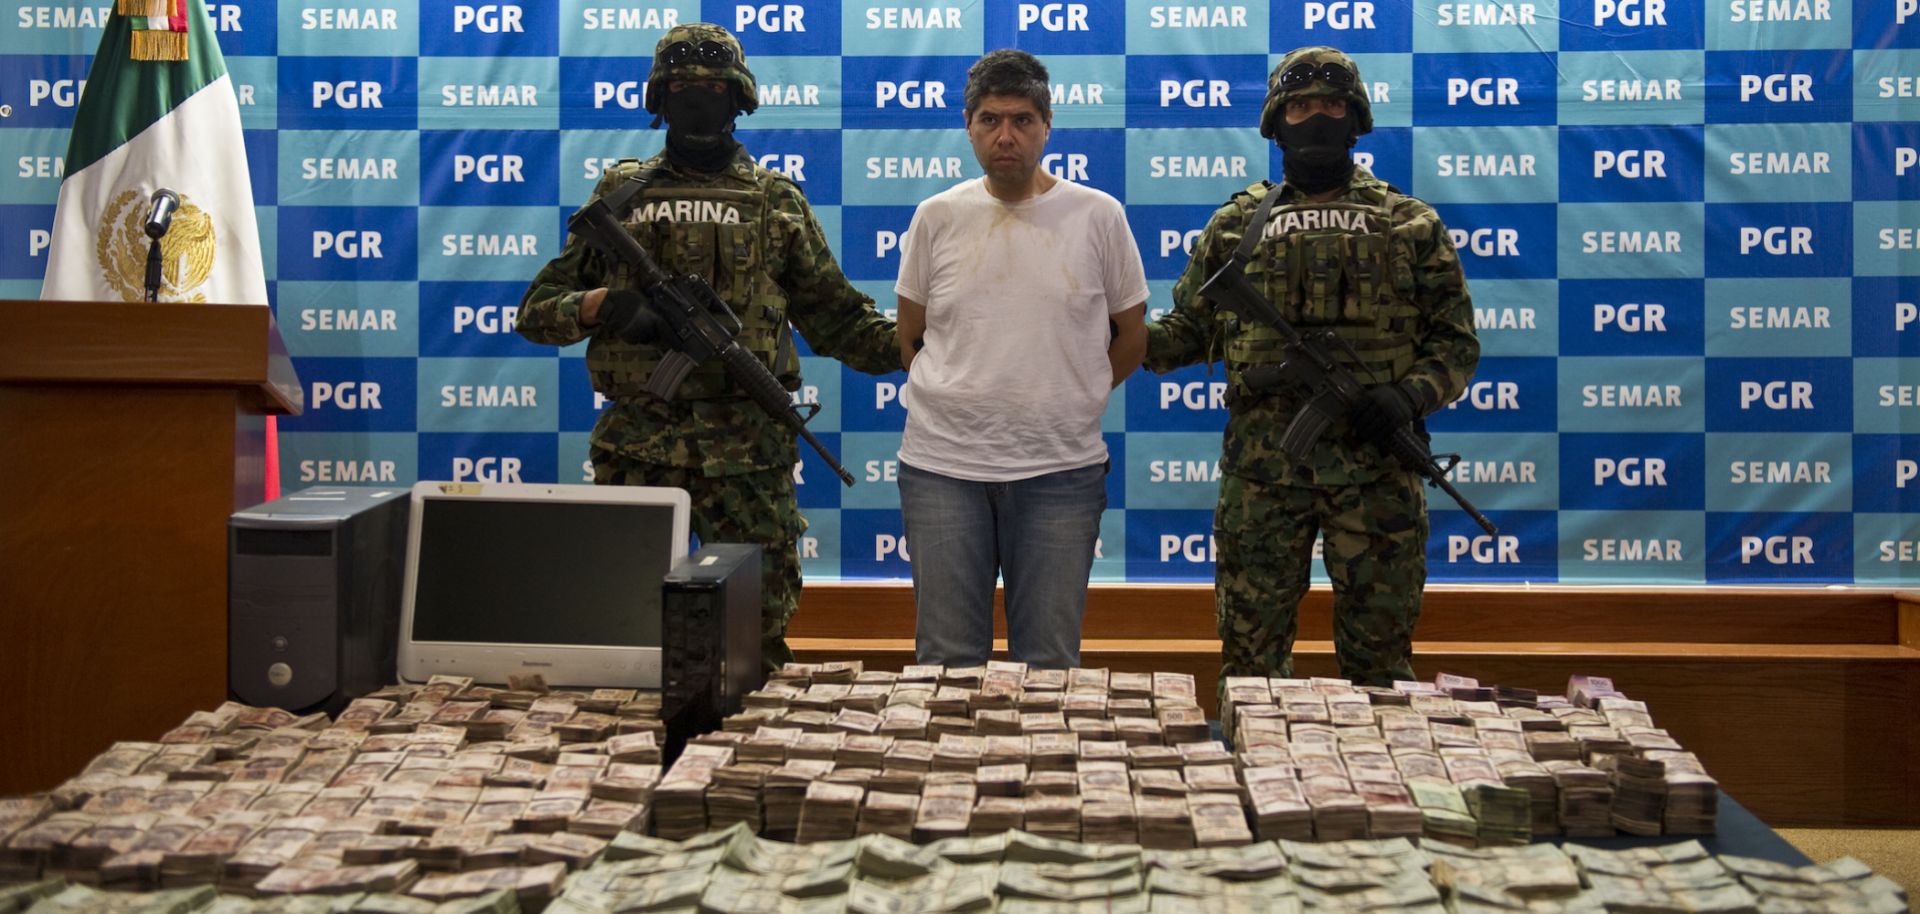 An alleged member of the Zetas drug cartel and money seized during his arrest